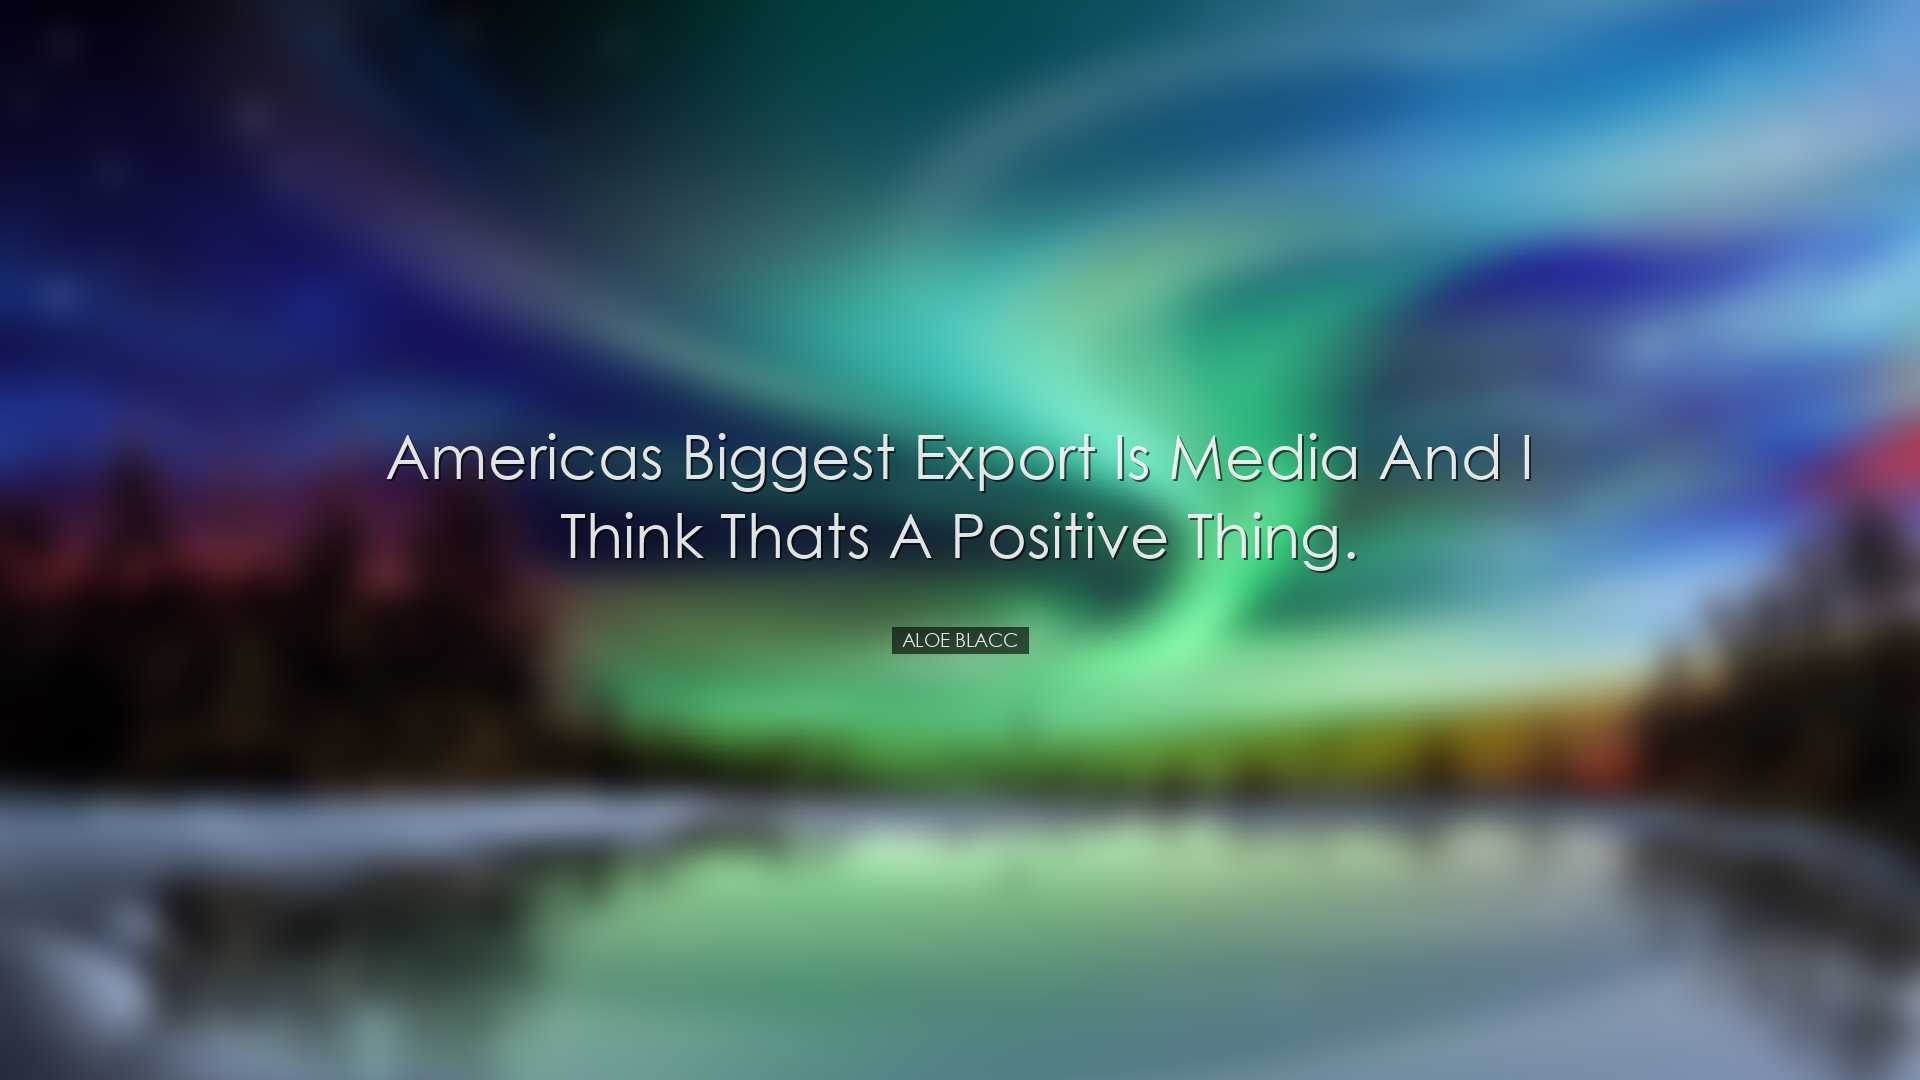 Americas biggest export is media and I think thats a positive thin